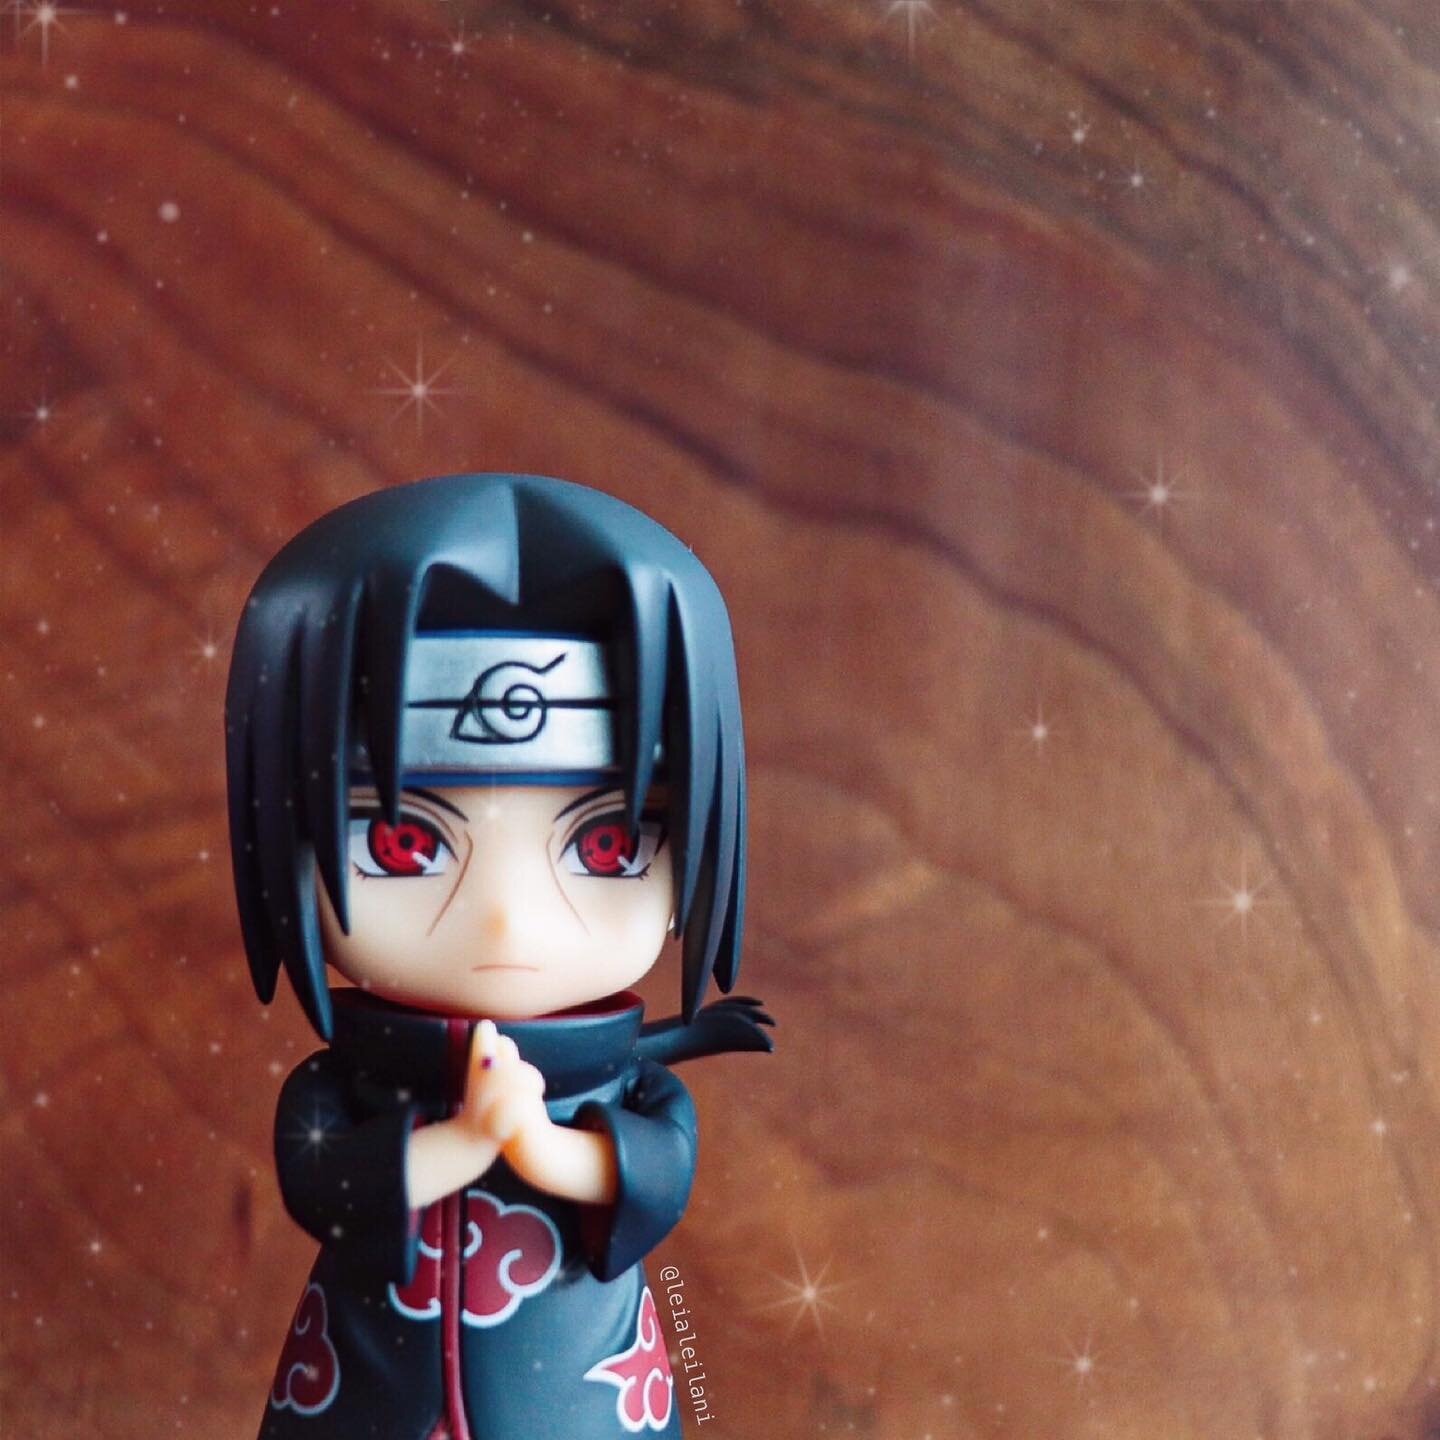 ❀ Who&rsquo;s your fav Naruto character? 🥷 Mine are Kakashi and Sakura 🌸⁣
⁣
My Itachi nendoroid arrived this week and he&rsquo;s adorable! Now I&rsquo;ve got all the Naruto nendos I wanted 🙌 I should take a photo of them all together 😋⁣
⁣
This we